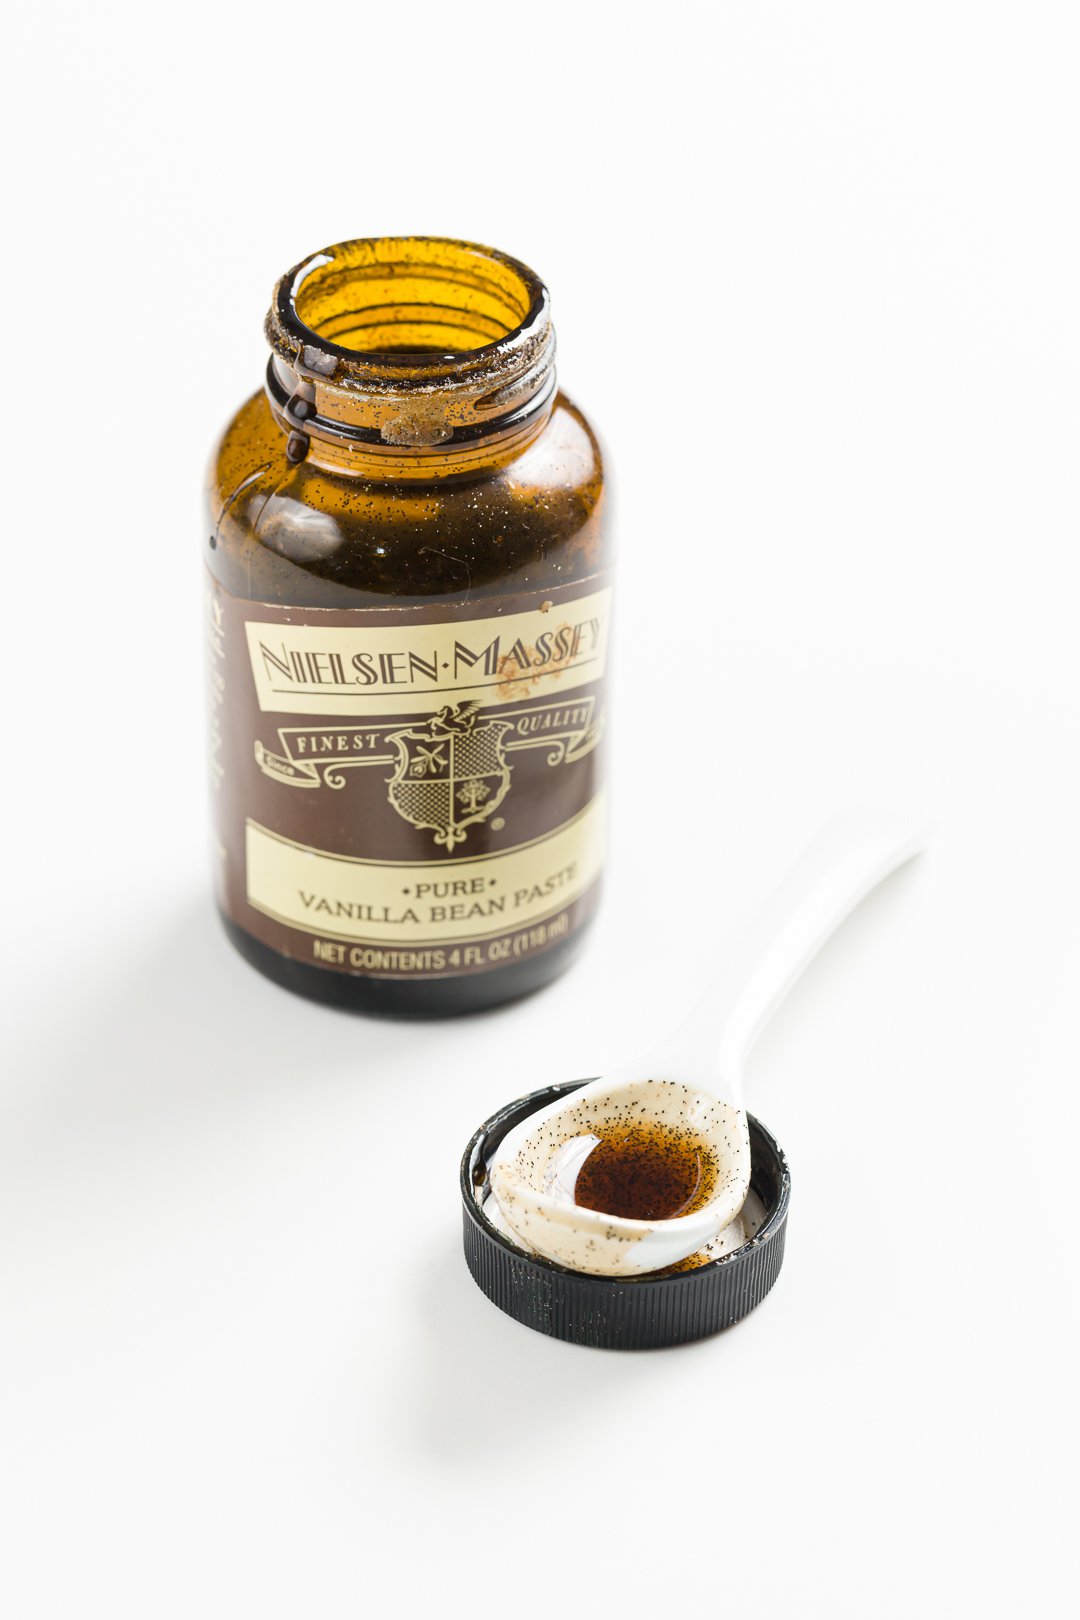 a spoon with vanilla bean paste in the foreground with a bottle of Nielsen-Massey vanilla bean paste in the background